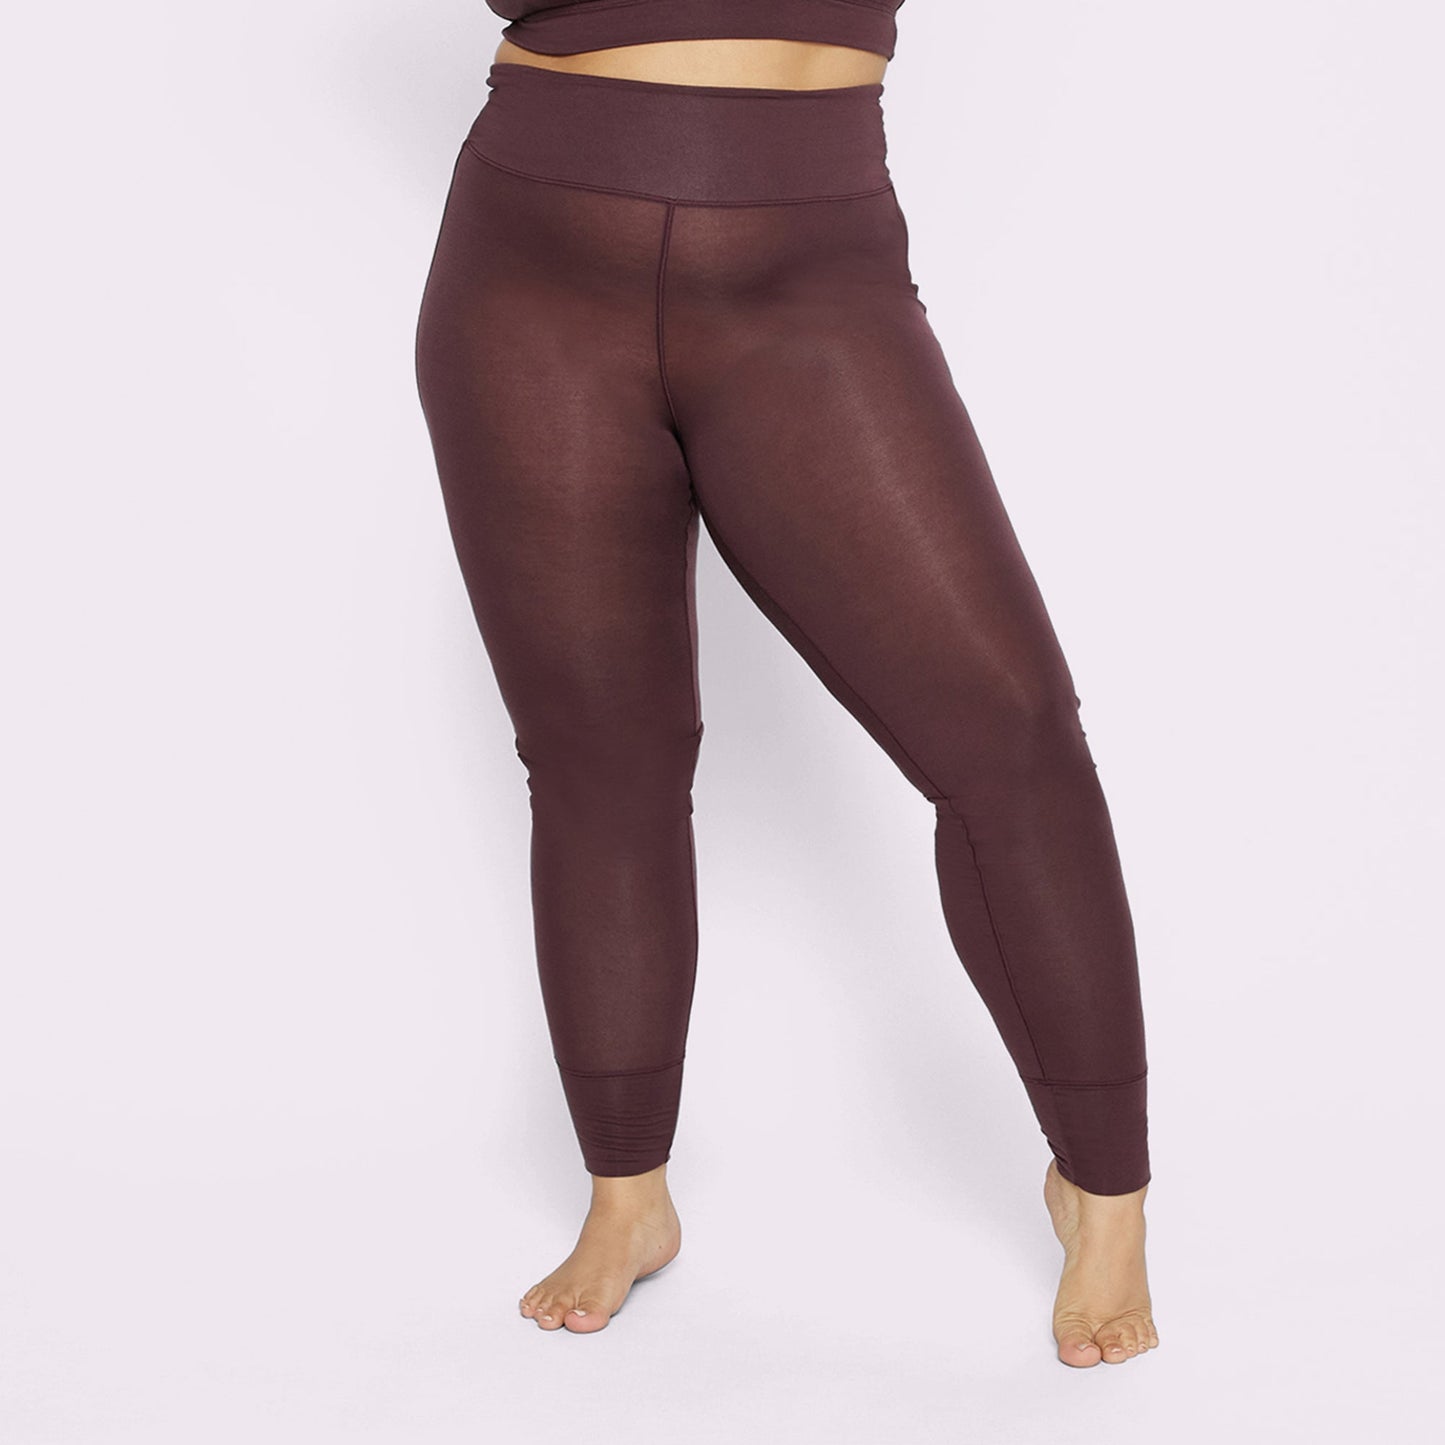 SuperSoft Warm Thermal Leggings | SuperSoft | Archive (Espresso)